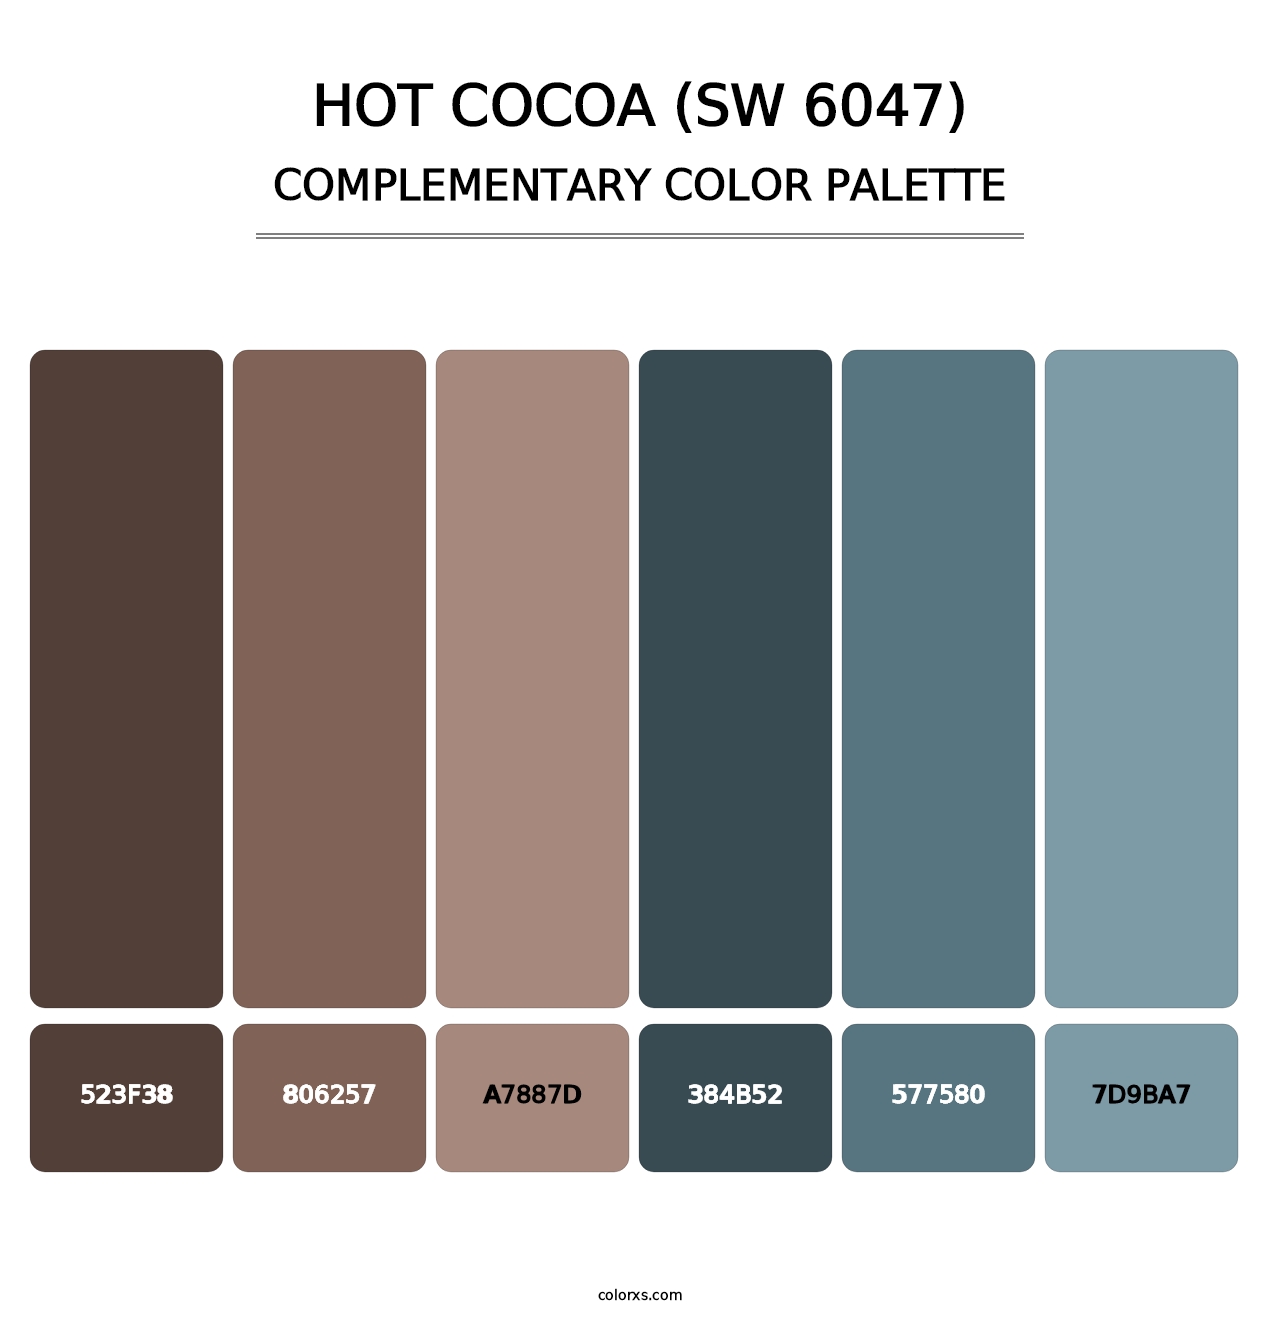 Hot Cocoa (SW 6047) - Complementary Color Palette